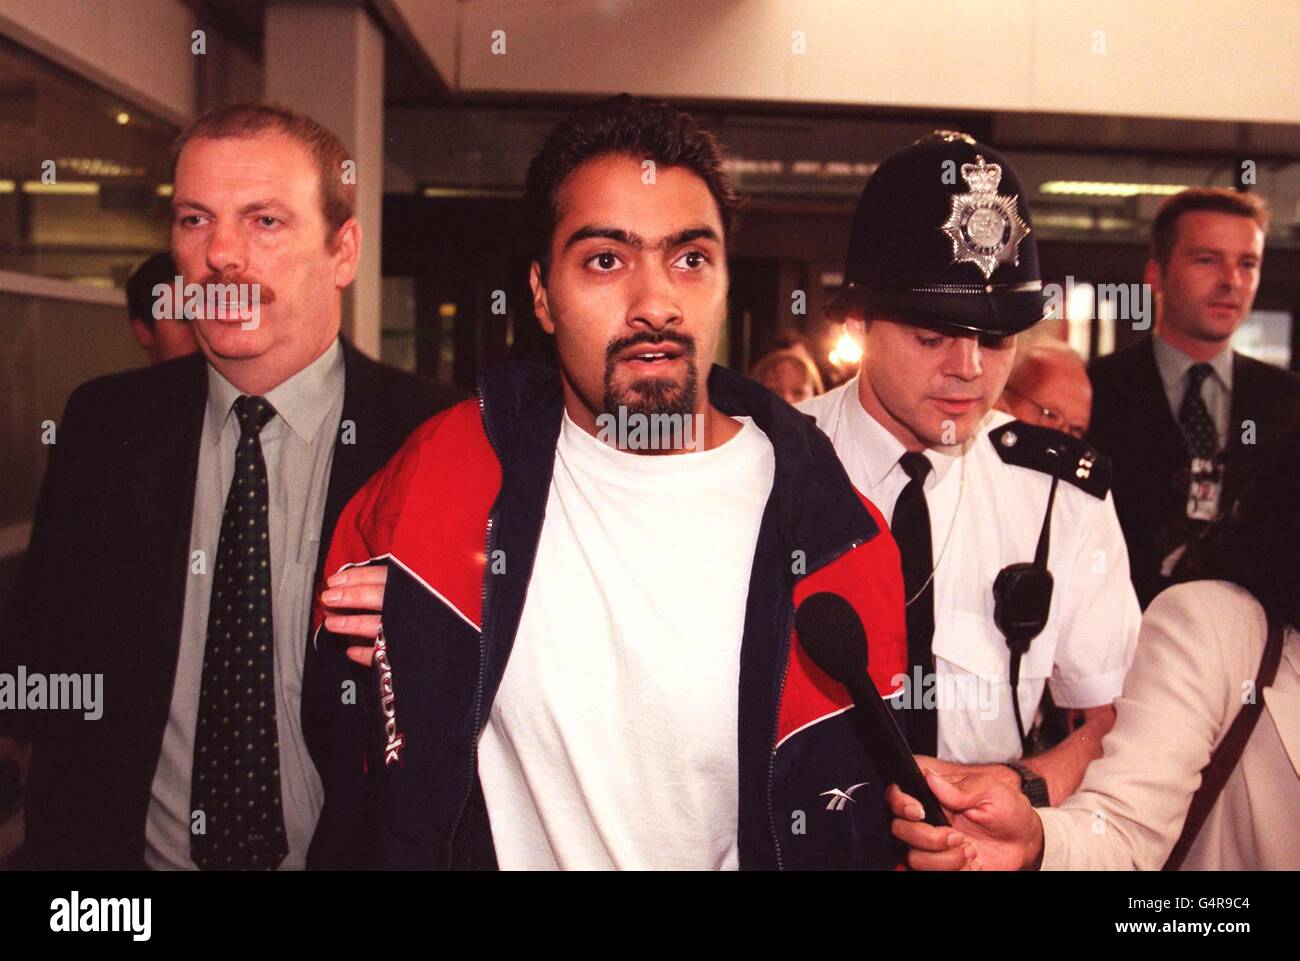 Ghulam Hussein at Heathrow Airport after arriving back from Yemen. Hussein, 25 was among eight Britons found guilty of a plan to bomb British targets in Aden, Yemen, but was sentenced to time he had already served while awaiting the trial last month. * Hussein was rushed through the airport terminal by police to be reunited with his family. Stock Photo